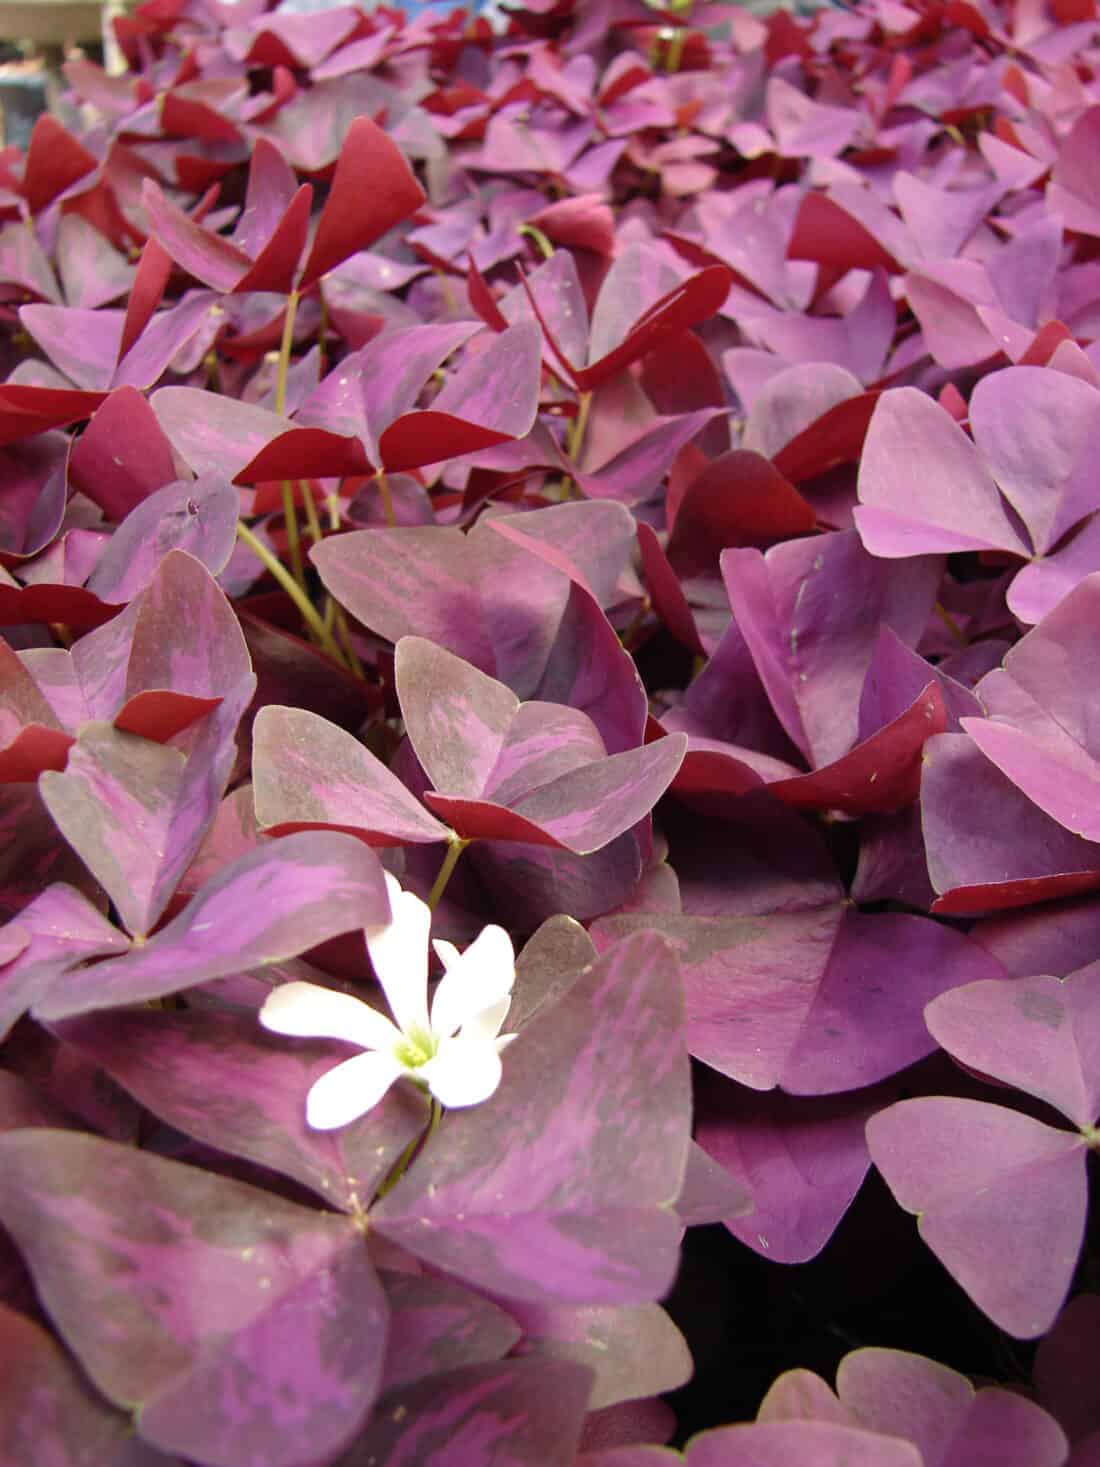 A group of purple leaves with a white flower.